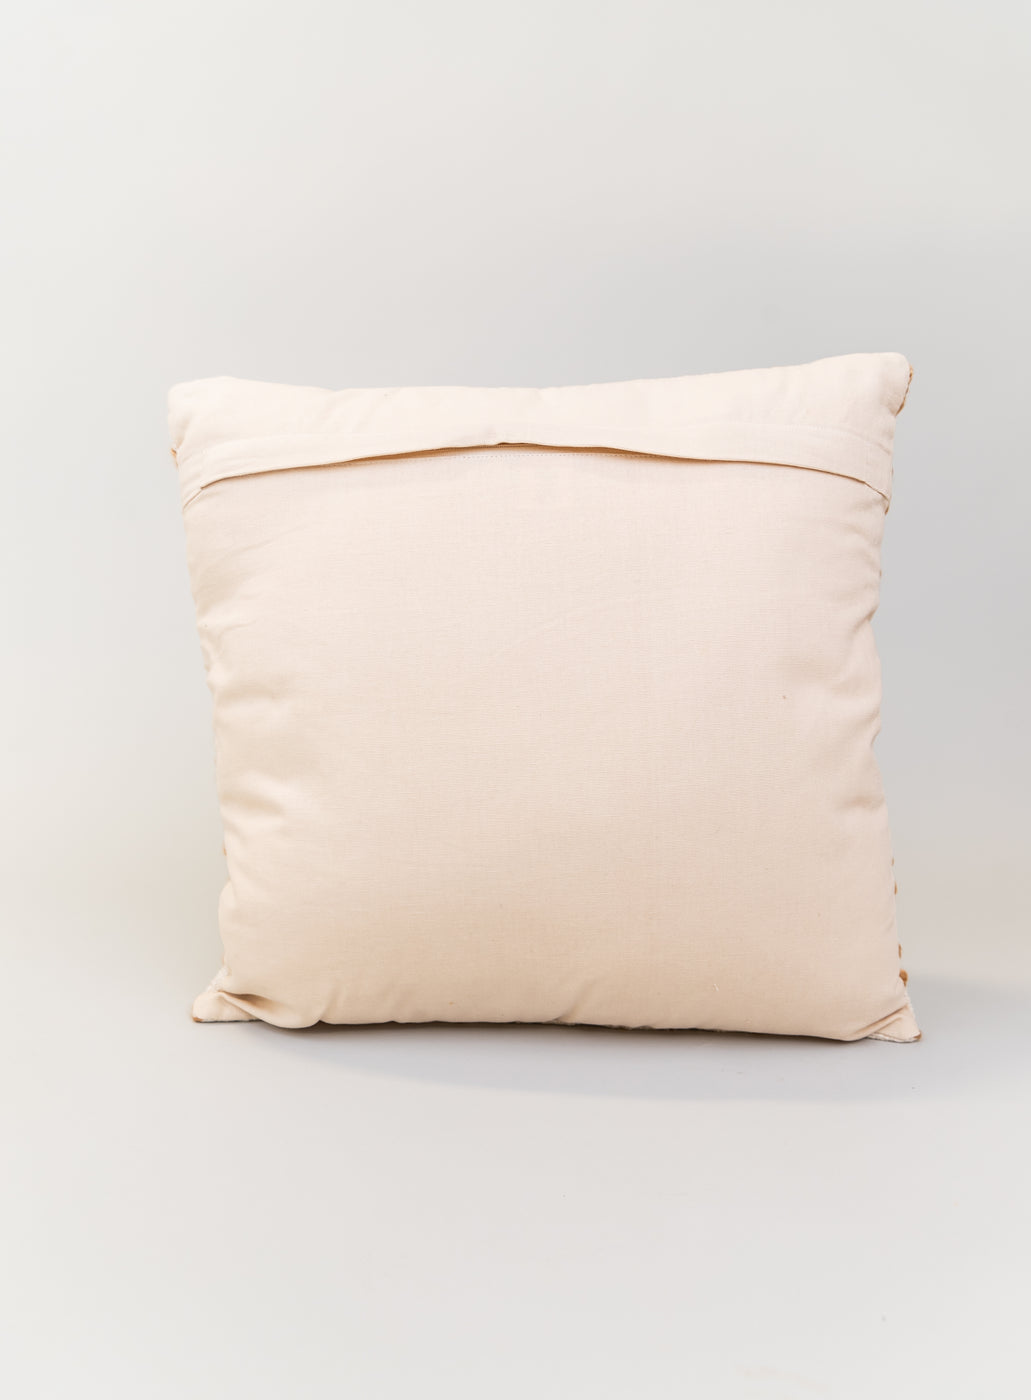 a white pillow with a brown edge